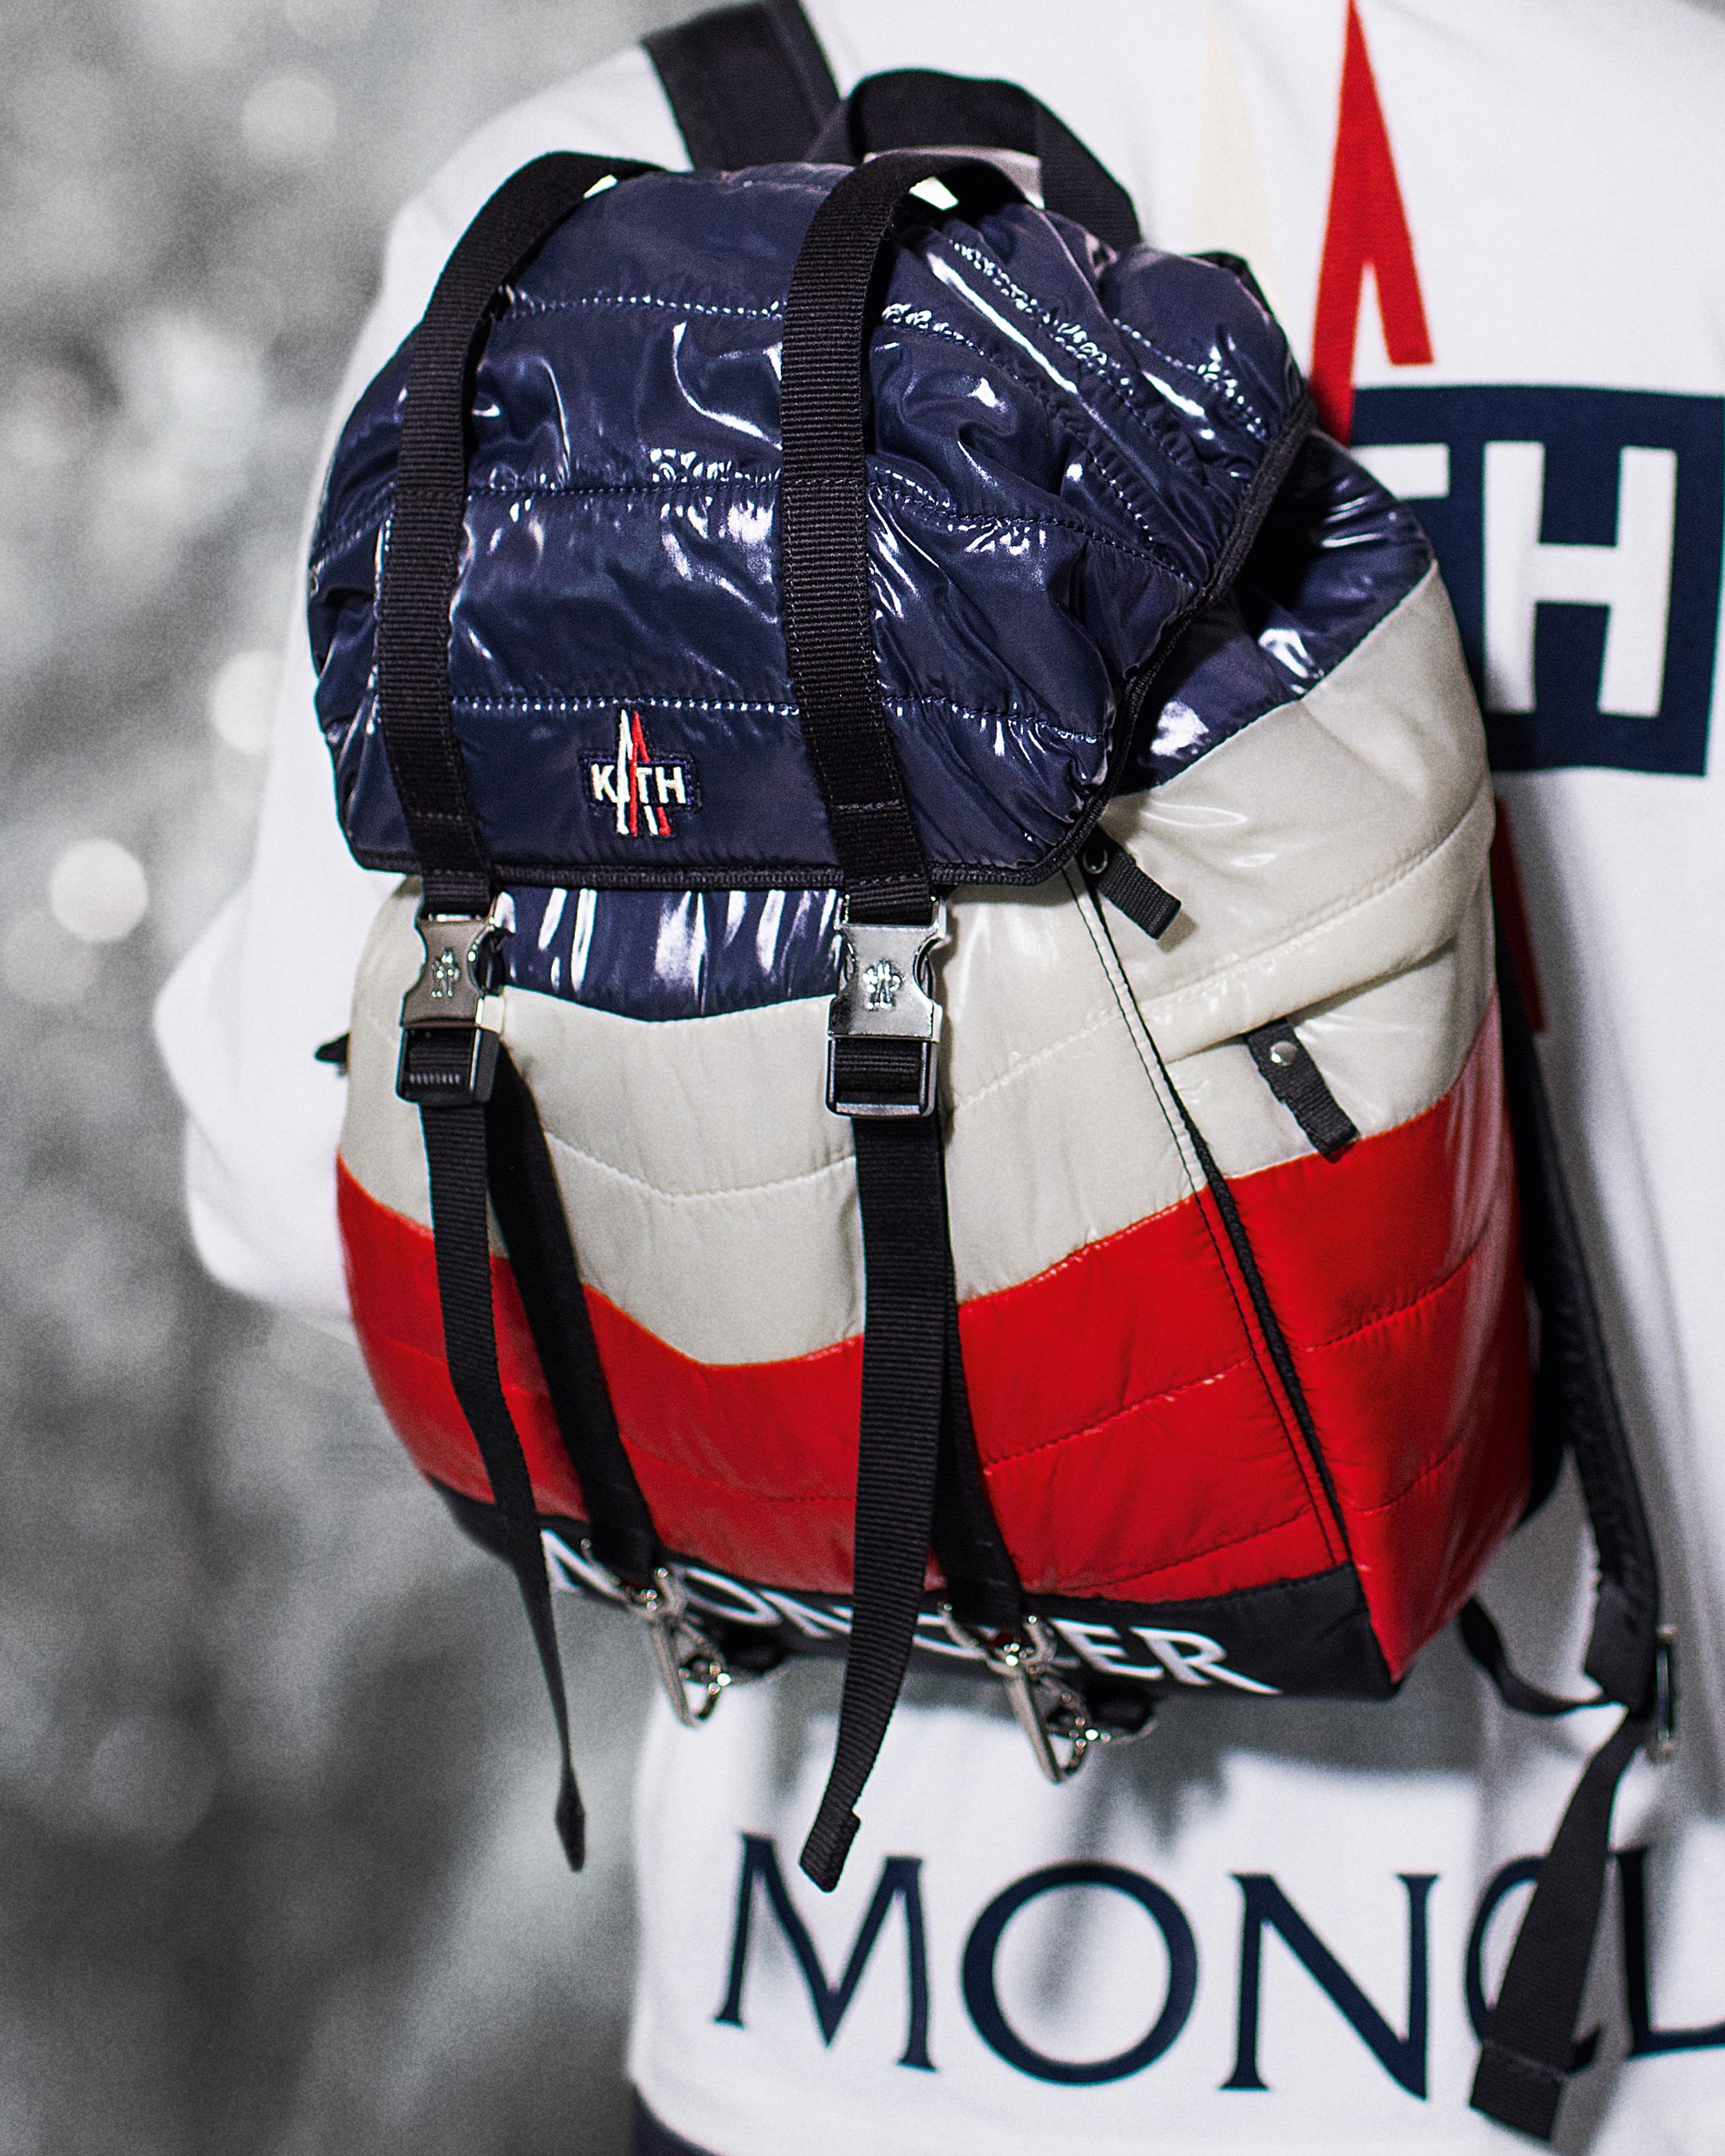 Moncler, Asics, and Kith Link for Winter Footwear and Apparel